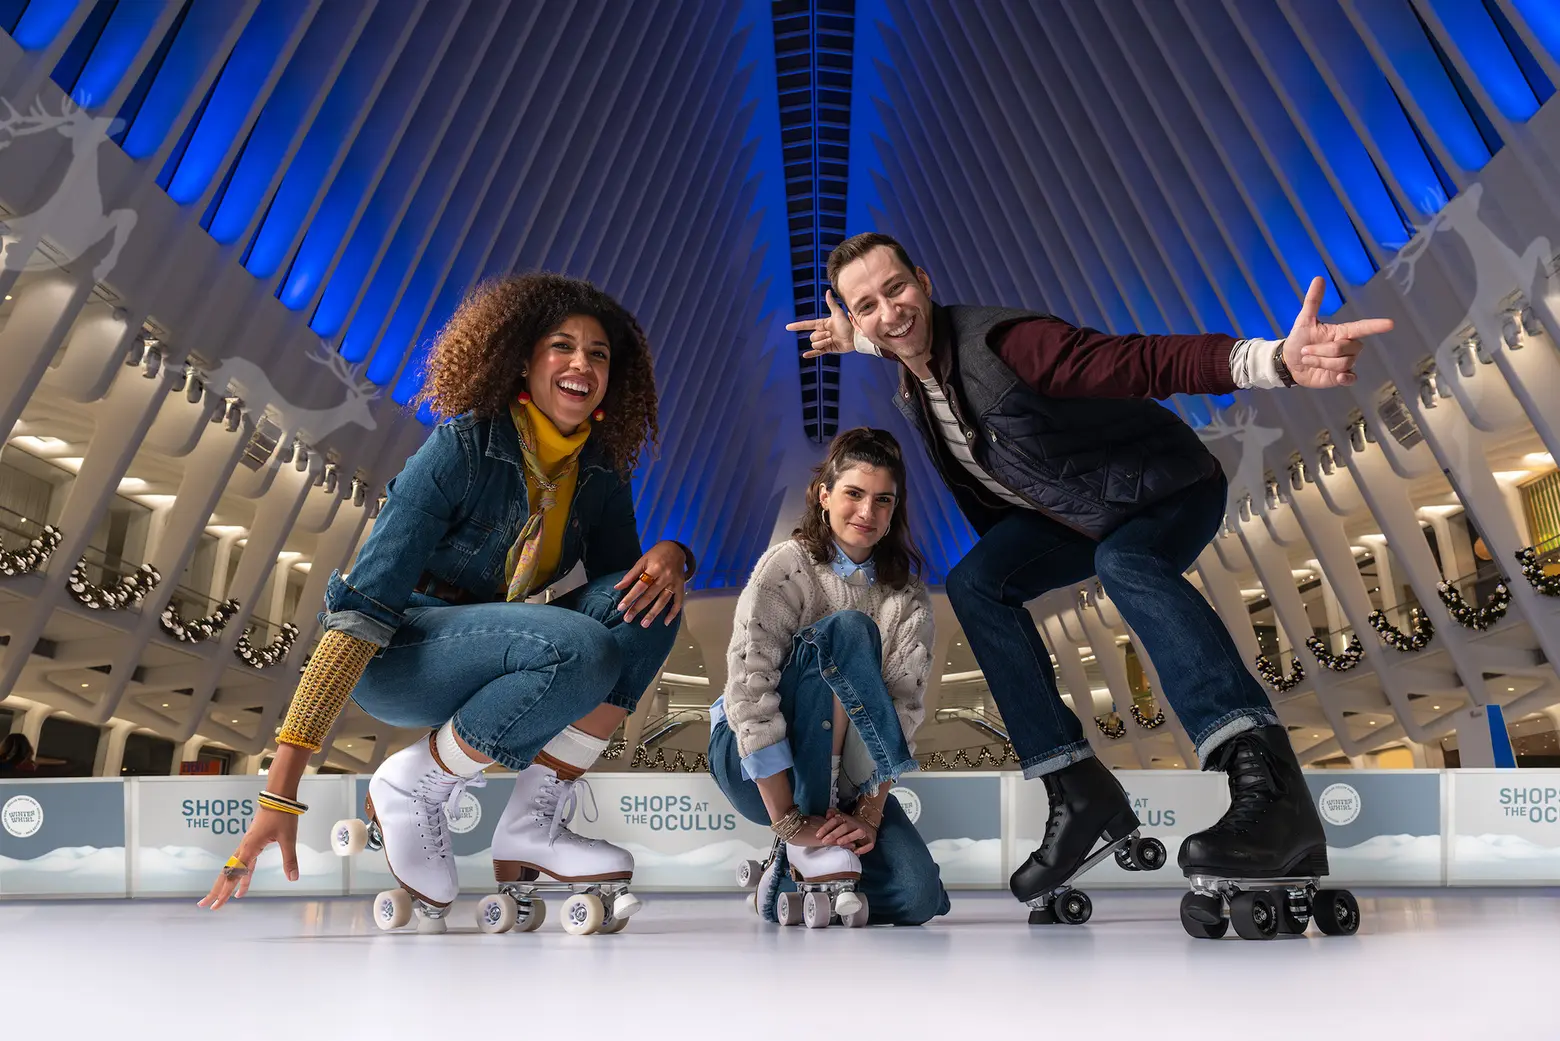 A festive roller rink is opening inside the Oculus